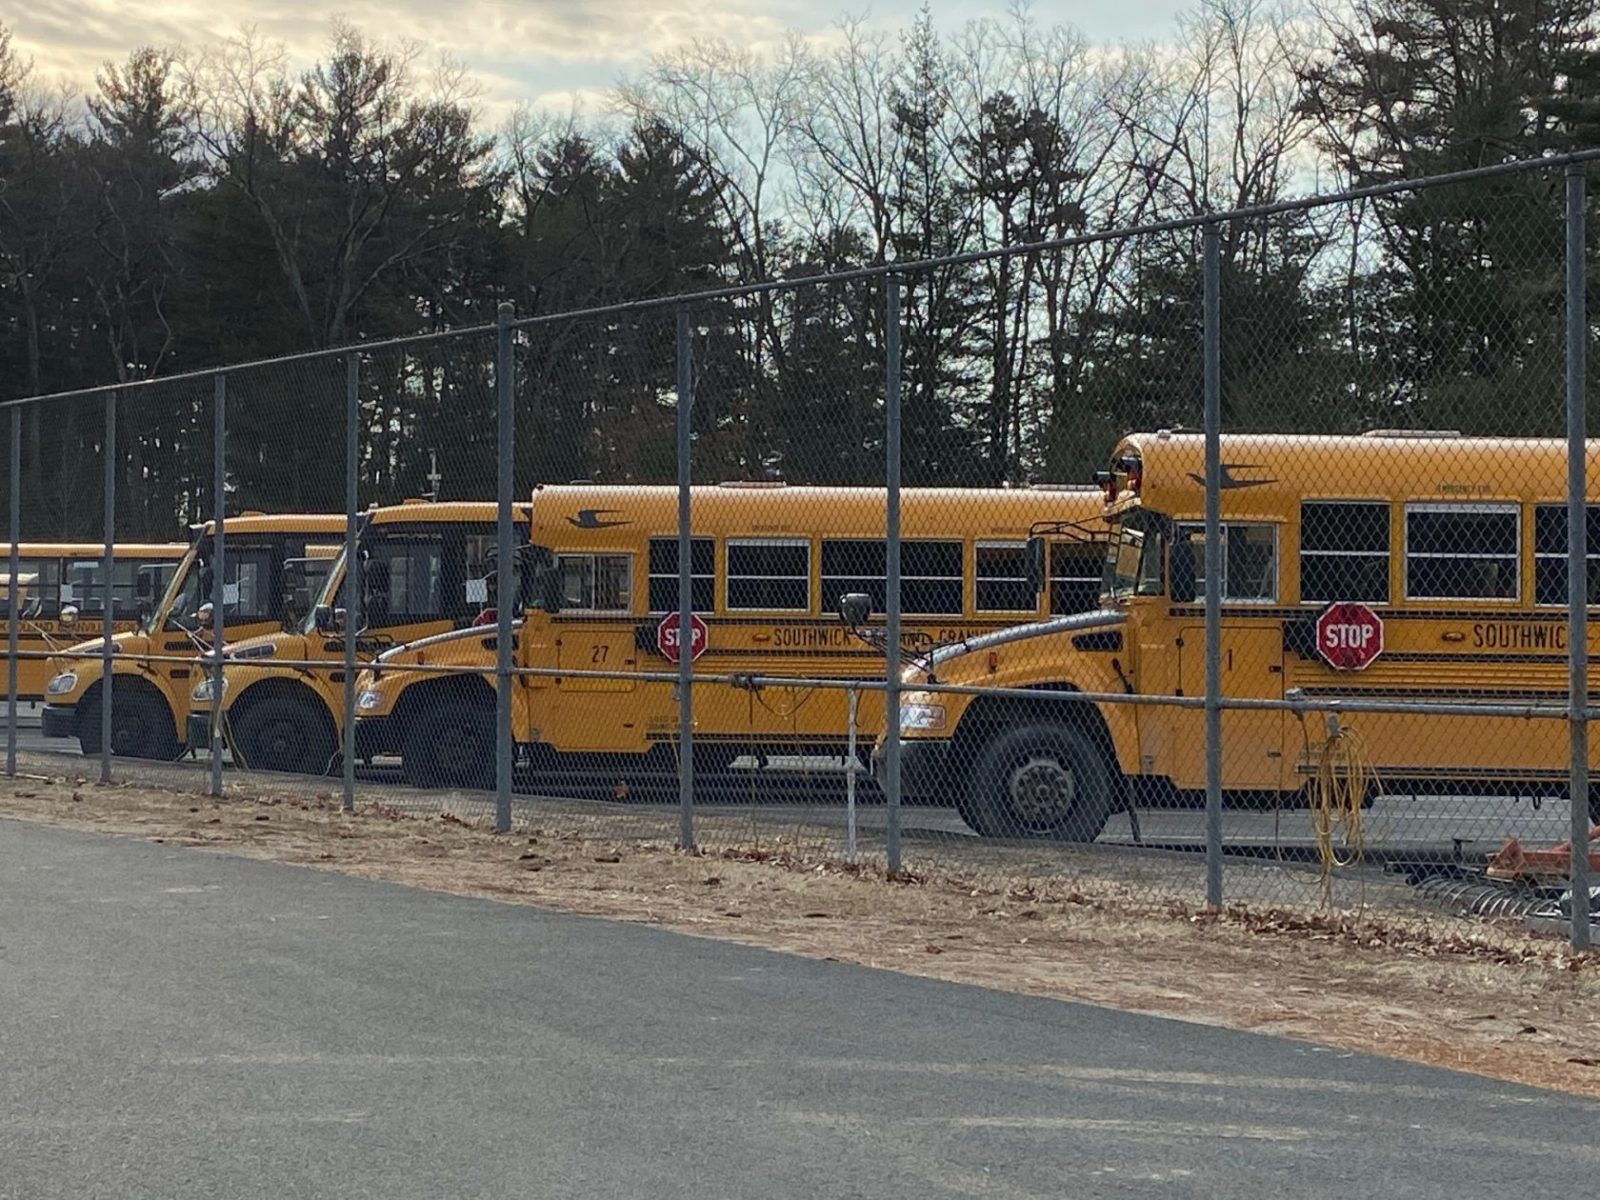 Granville Selectboard member opposes school bus outsourcing The